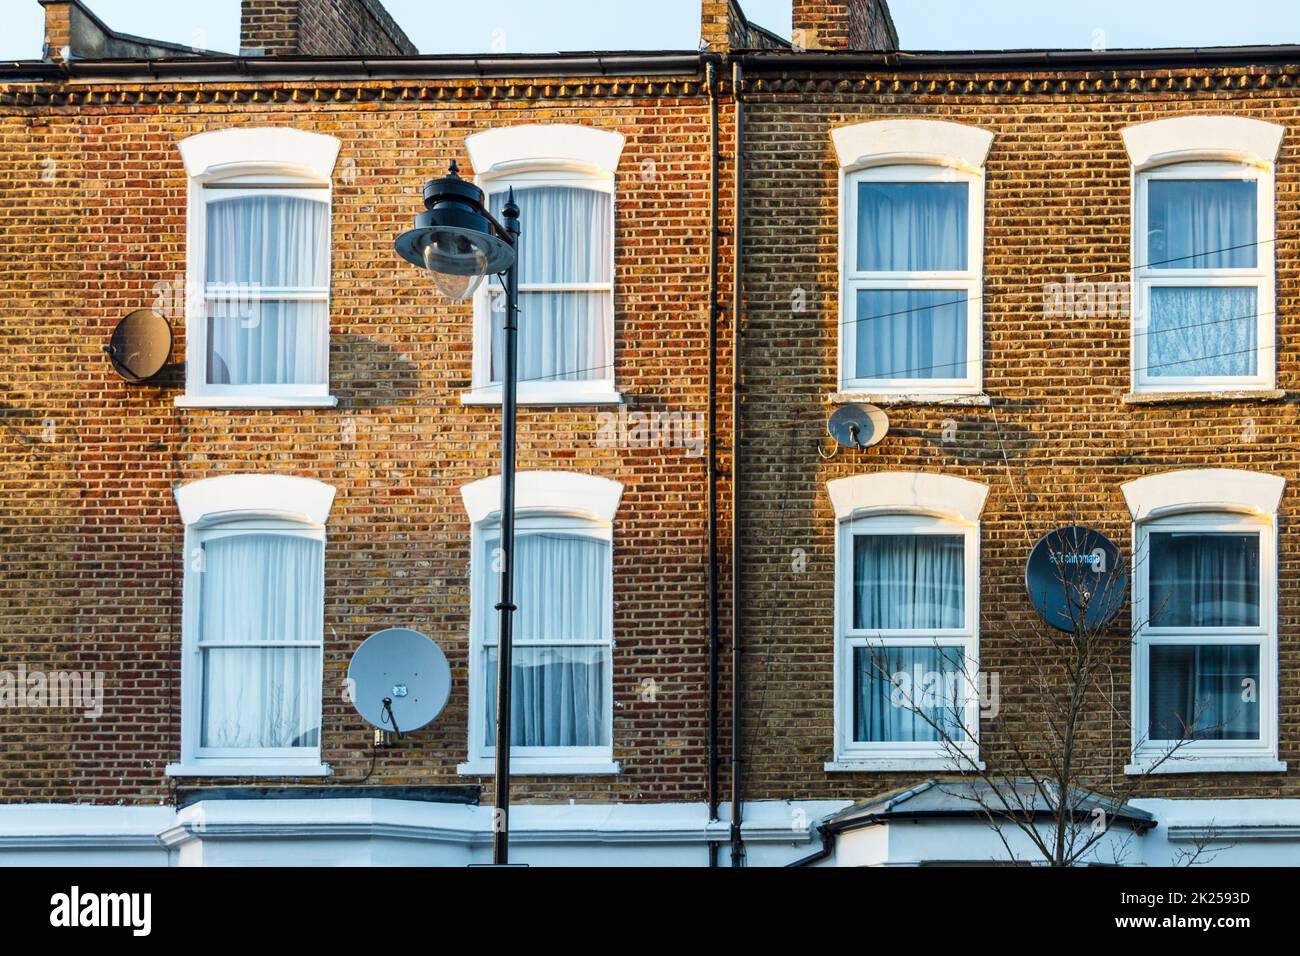 Satellite dishes, unlawfully placed on the exterior of properties in a conservation area in Islington, London, UK Stock Photo